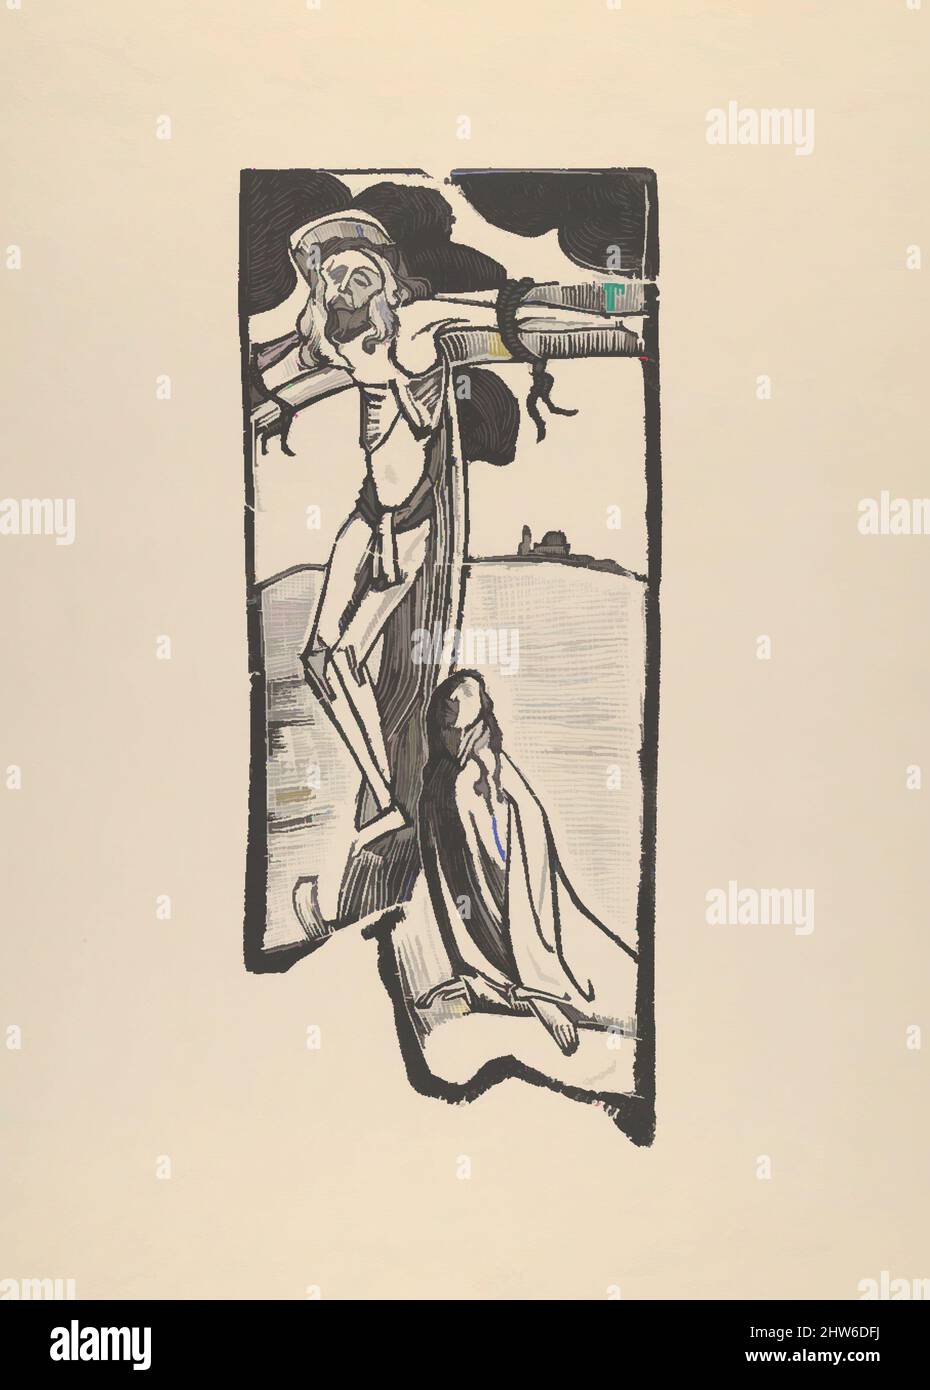 https://c8.alamy.com/comp/2HW6DFJ/art-inspired-by-crucifixion-also-called-christ-januarymarch-1894-woodcut-on-heavy-cream-laid-paper-image-13-34-5-34-in-35-146-cm-prints-mile-bernard-french-lille-18681941-paris-classic-works-modernized-by-artotop-with-a-splash-of-modernity-shapes-color-and-value-eye-catching-visual-impact-on-art-emotions-through-freedom-of-artworks-in-a-contemporary-way-a-timeless-message-pursuing-a-wildly-creative-new-direction-artists-turning-to-the-digital-medium-and-creating-the-artotop-nft-2HW6DFJ.jpg